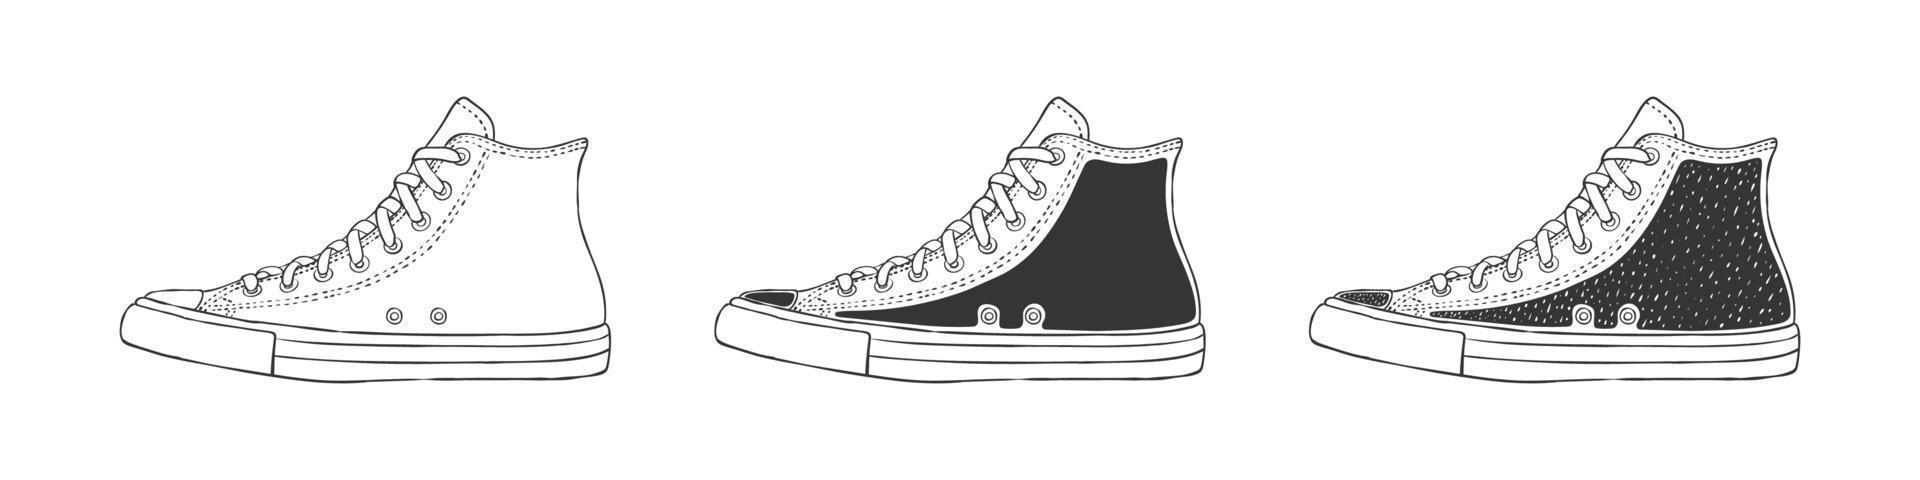 Sneaker icons. Classic sneakers. Fashion footwear. Hand-drawn style shoes. Vector image